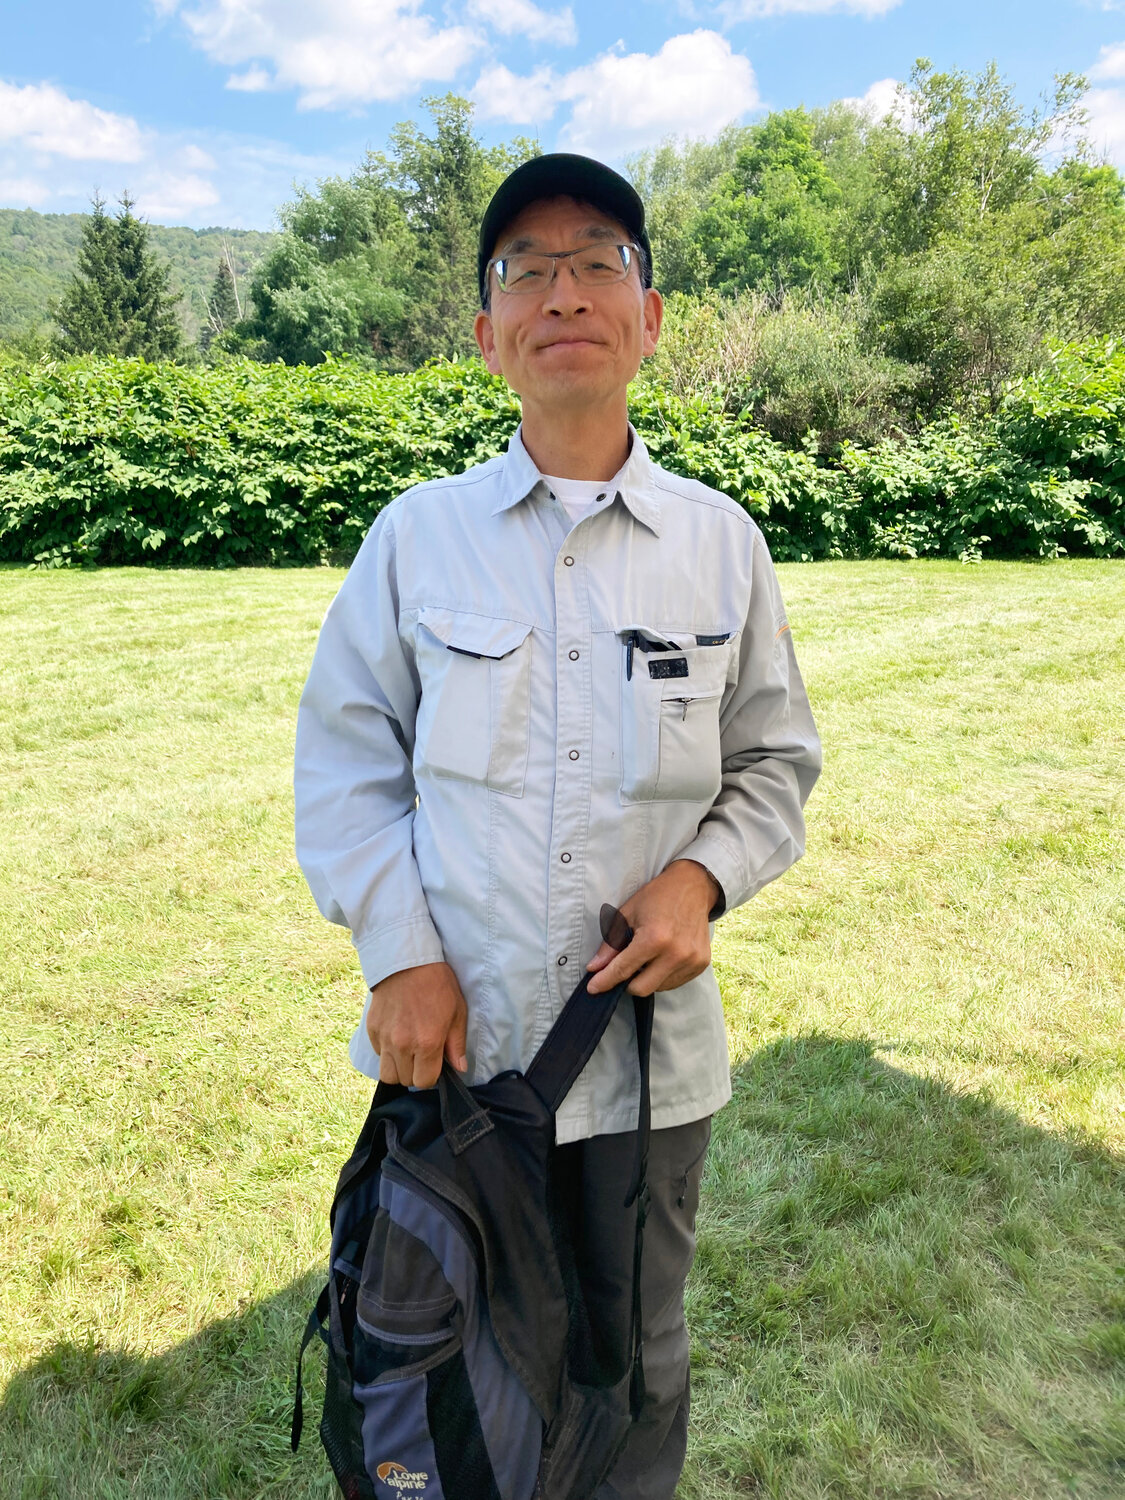 This year’s winner of the Hardy Cup was  Masaki Takemoto, who traveled all the way from Japan for the event! Masaki said that he practices casting every day, in all types of weather.